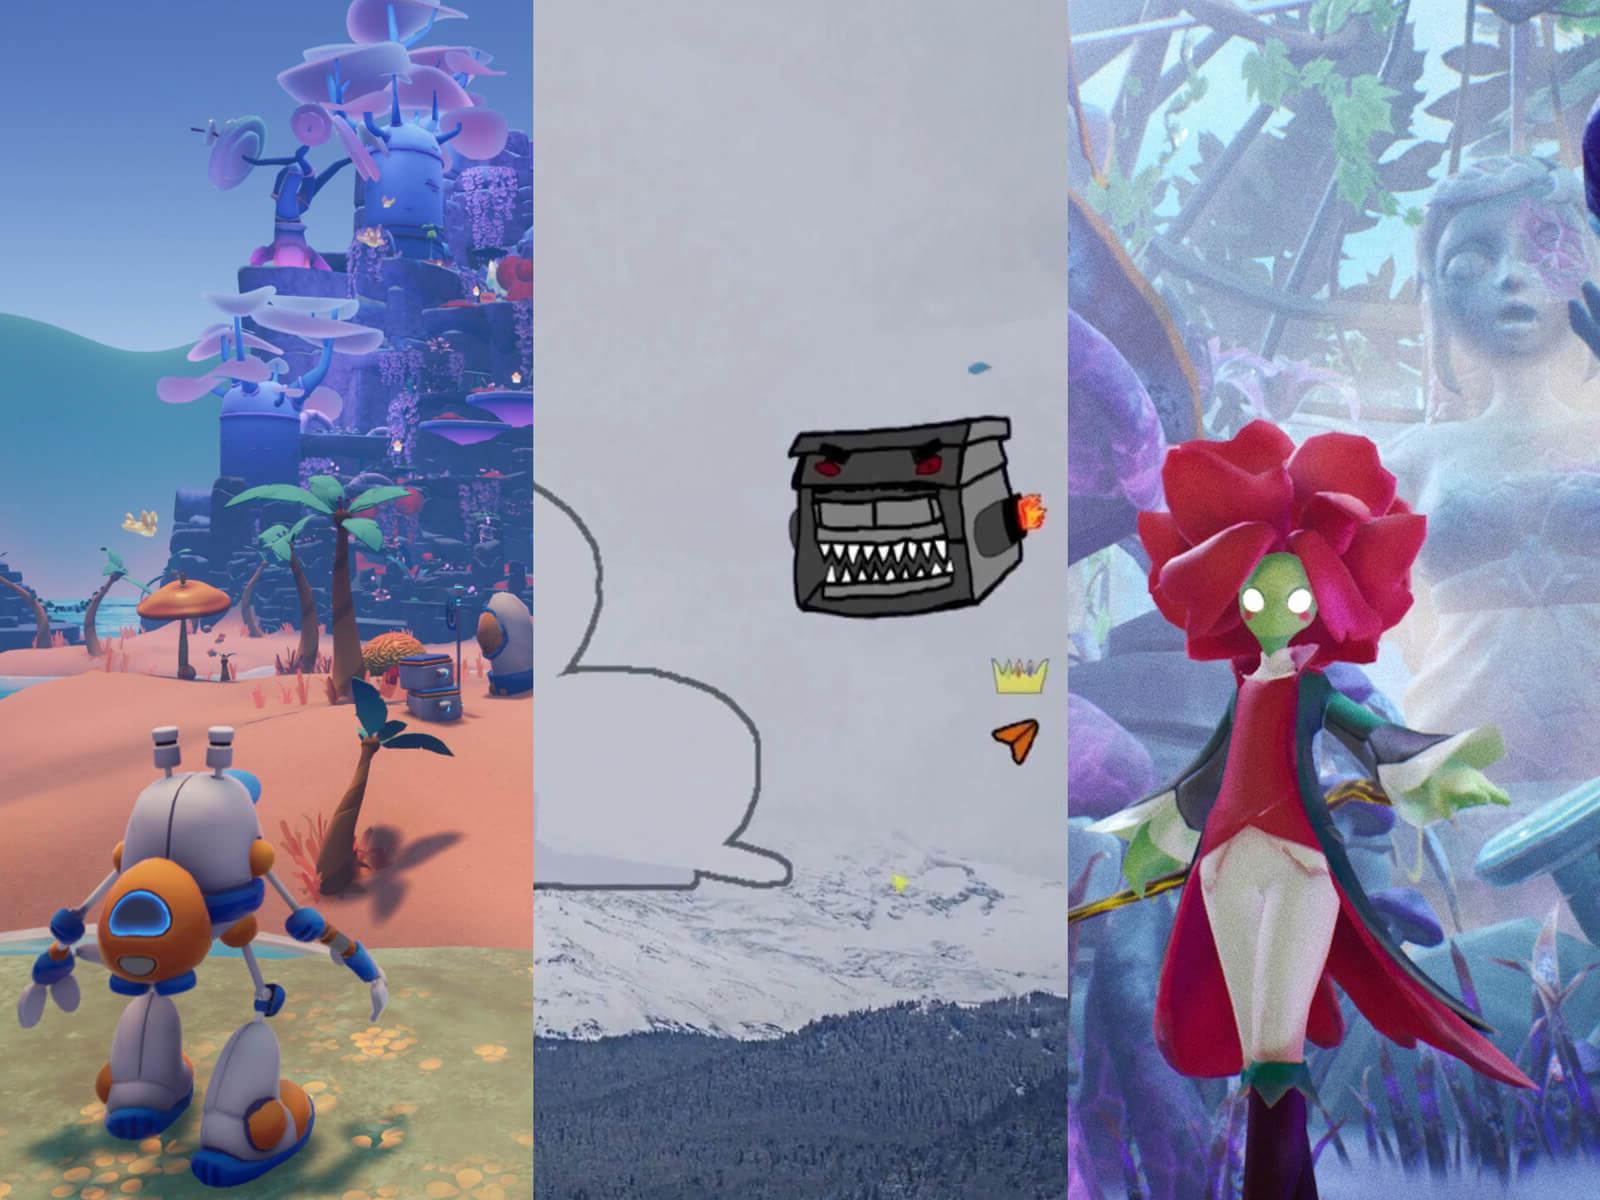 Collage of student game screenshots featuring a robot, gardening witch, and more.